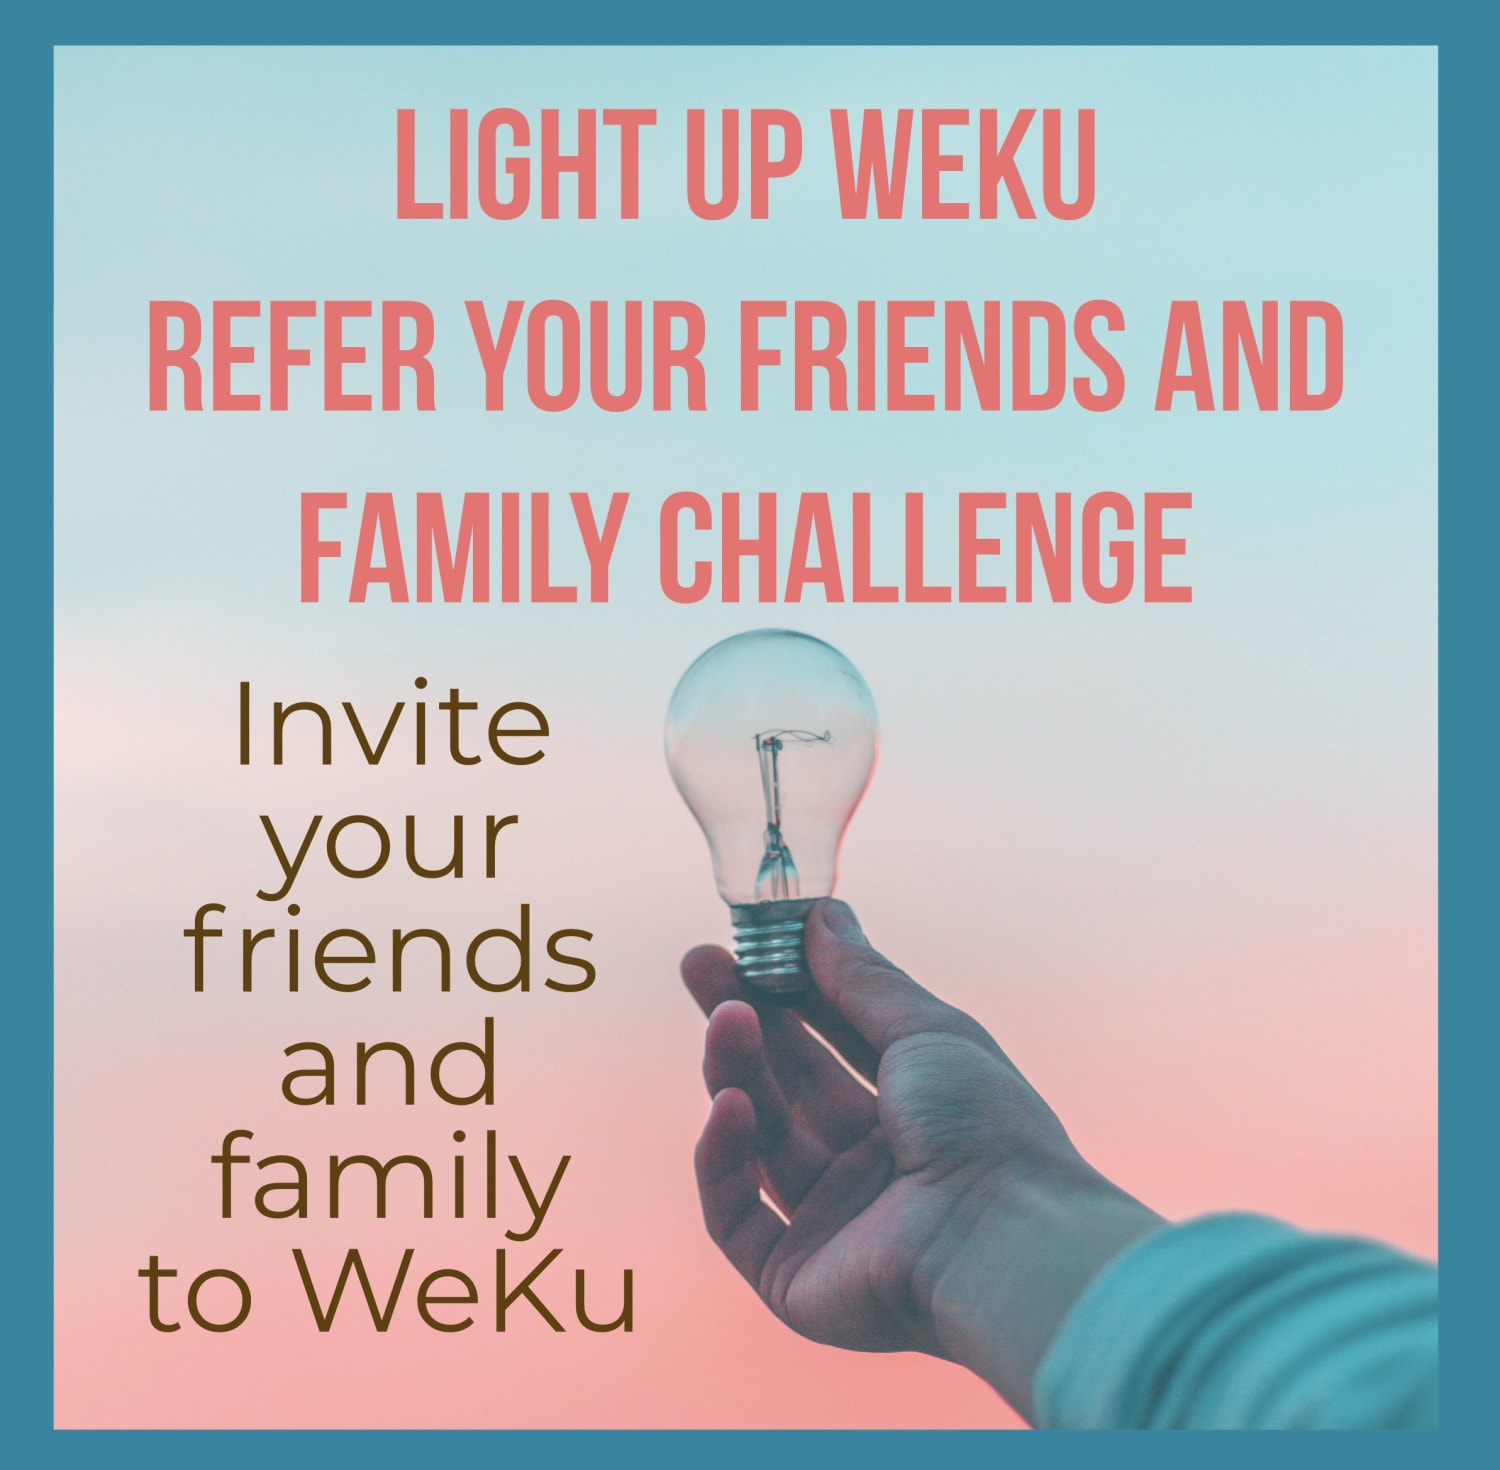 Upvote Campaign #5 - Light Up WEKU 💡Refer Your Friends And Family - The Challenge 📣